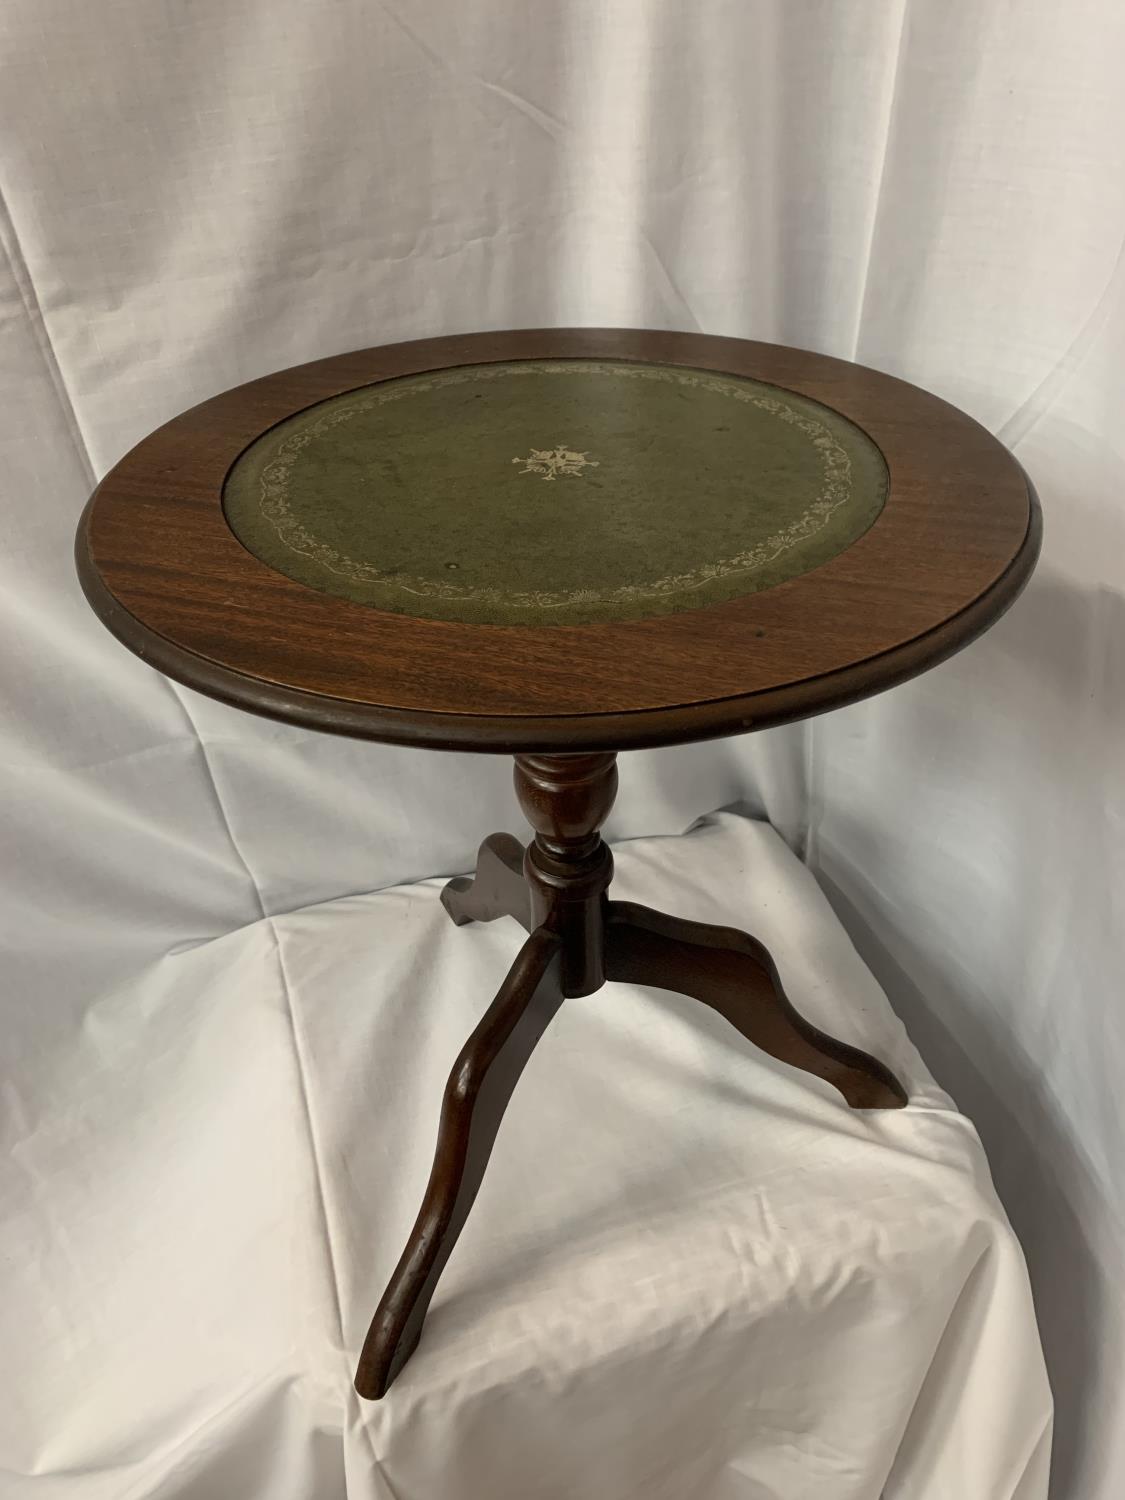 A SMALL CIRCULAR MAHOGANY SIDE TABLE WITH INLAID GREEN LEATHER TOP H:48CM